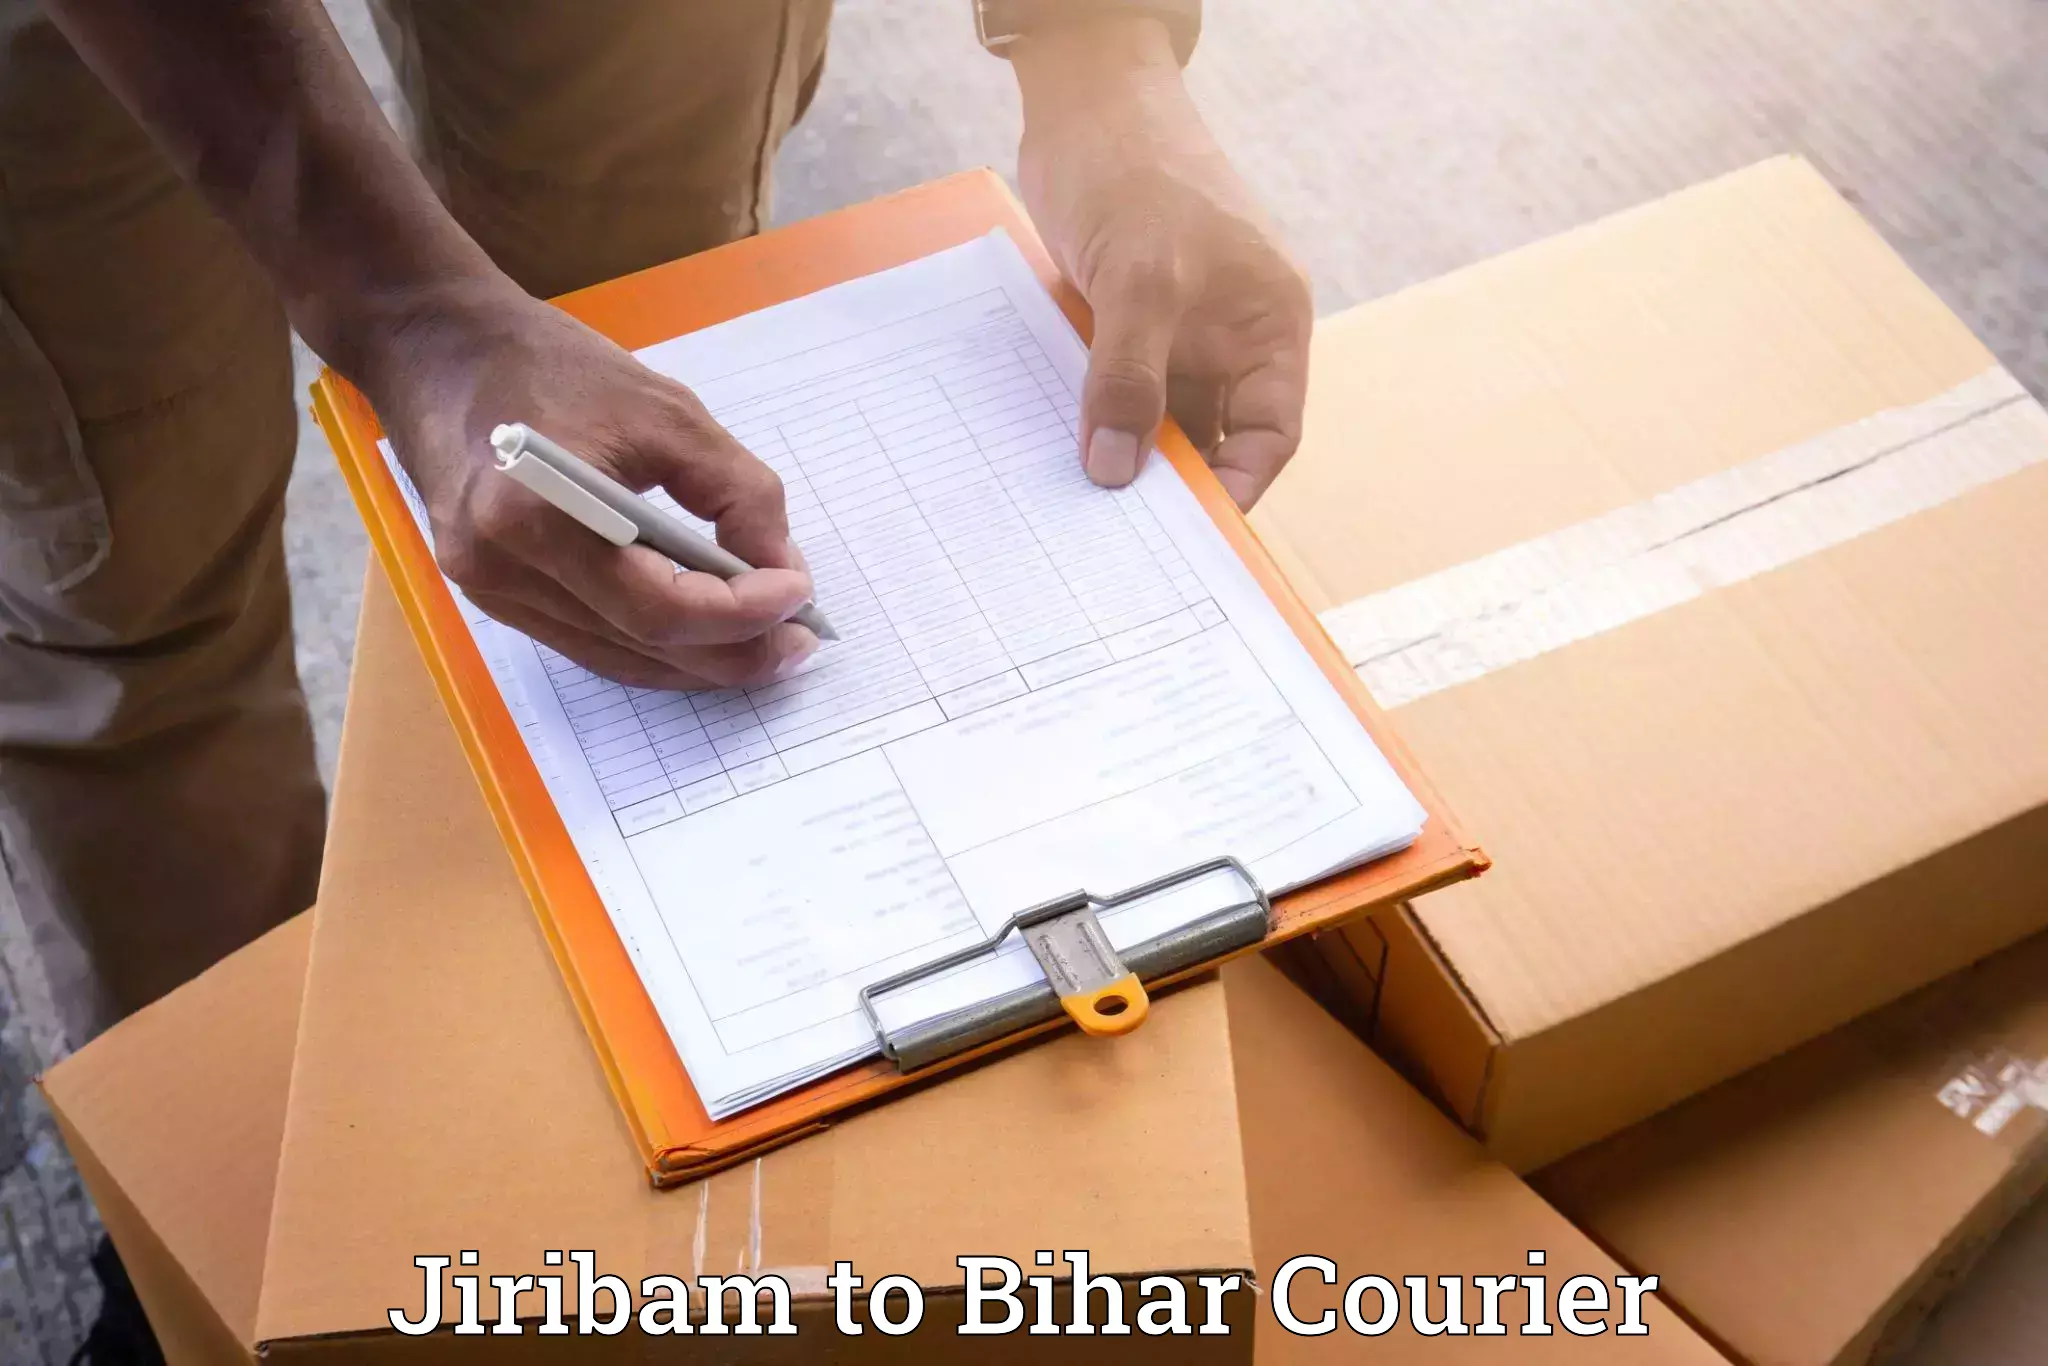 Professional moving assistance in Jiribam to Bihar